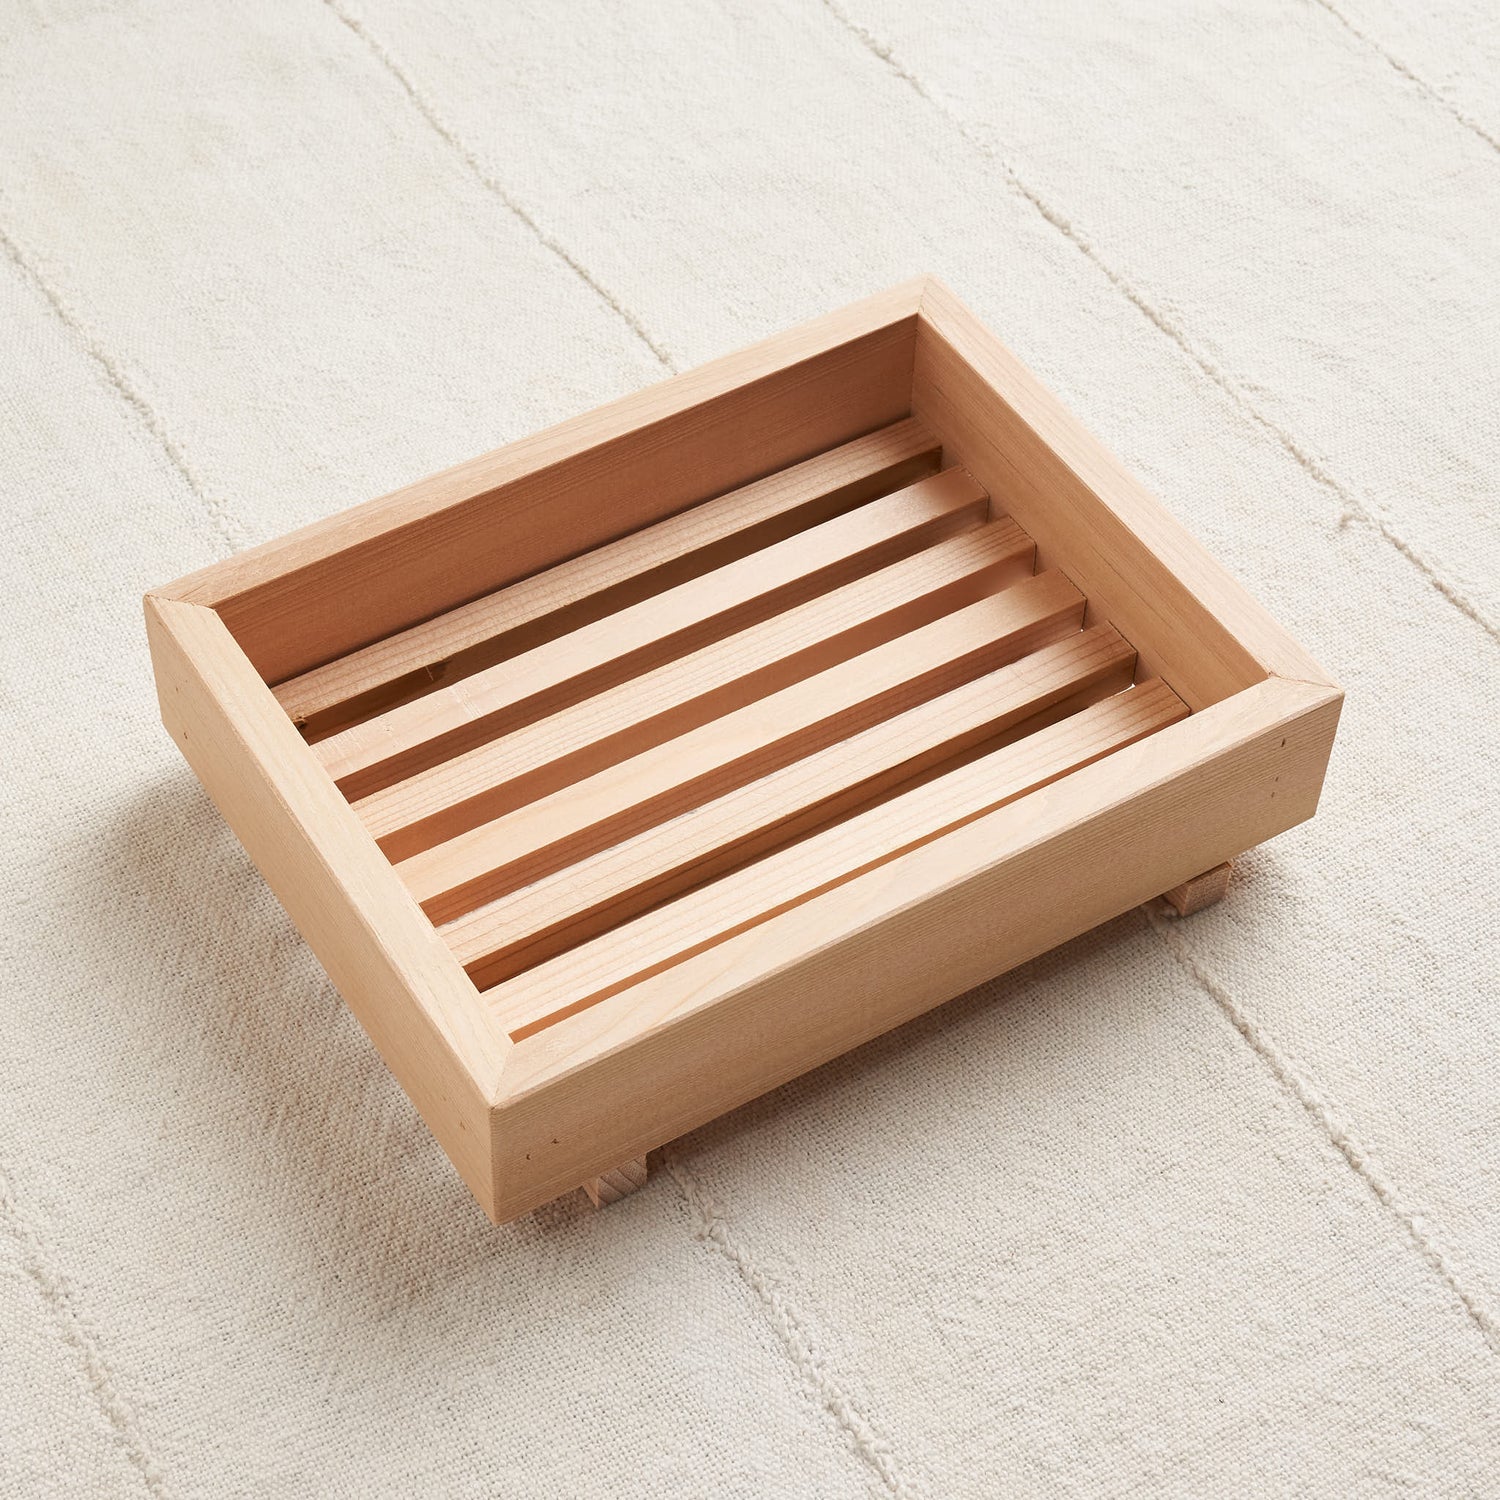 Draining Cedar Soap Dish 100% Natural Wood No Stains Varnishes or  Chemicals. Soap Holder / Handmade / Natural / Minimalistic 